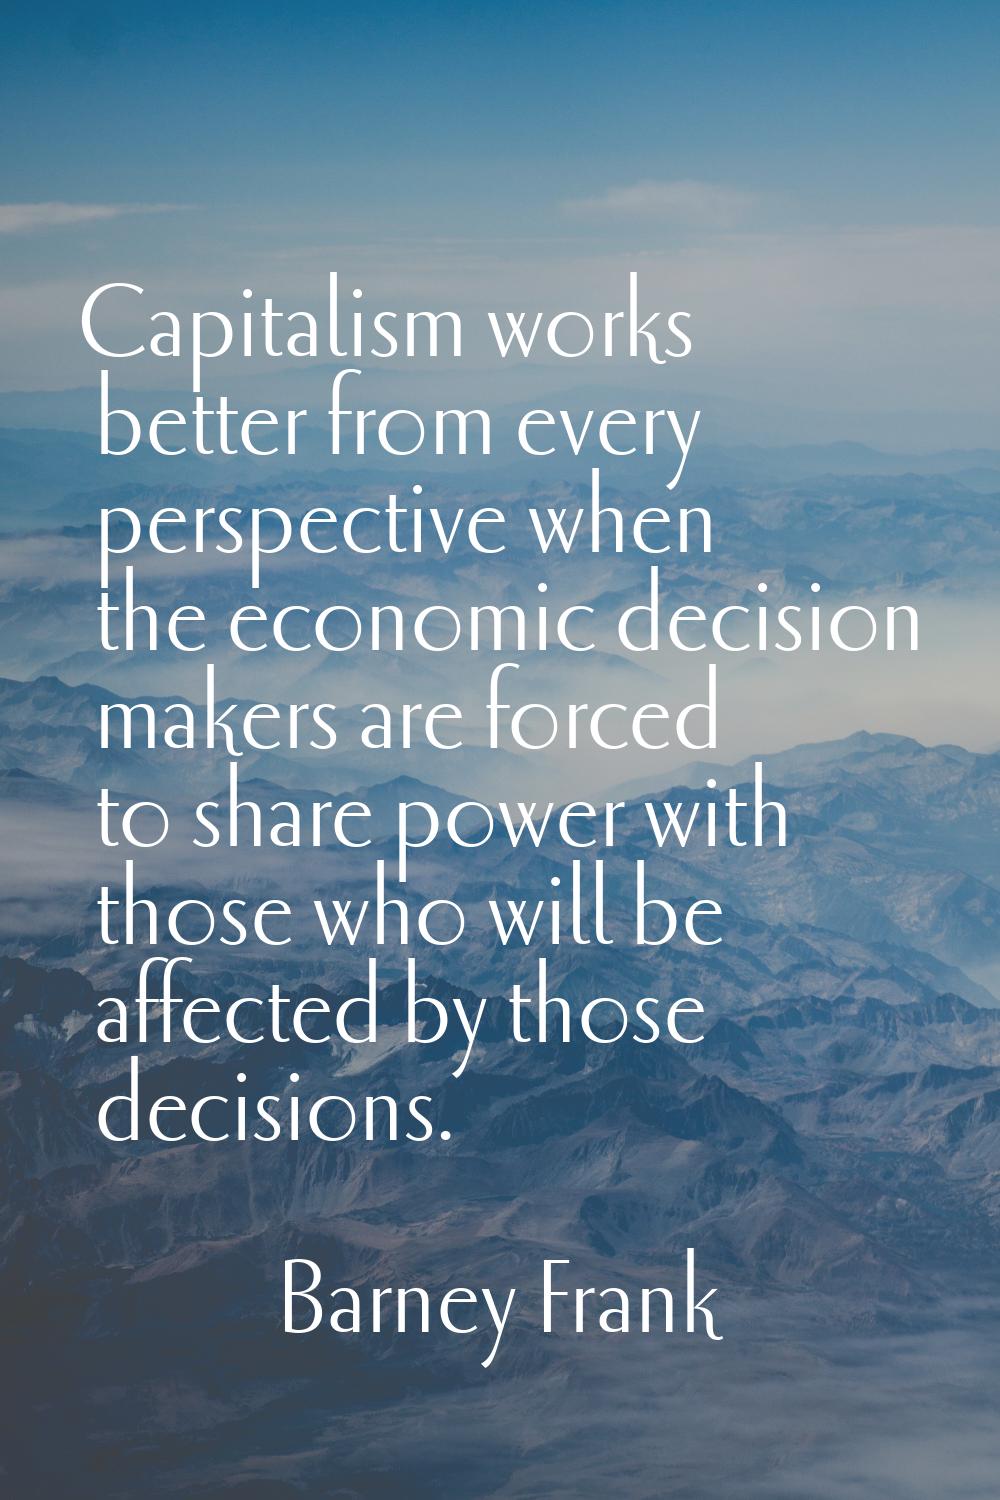 Capitalism works better from every perspective when the economic decision makers are forced to shar